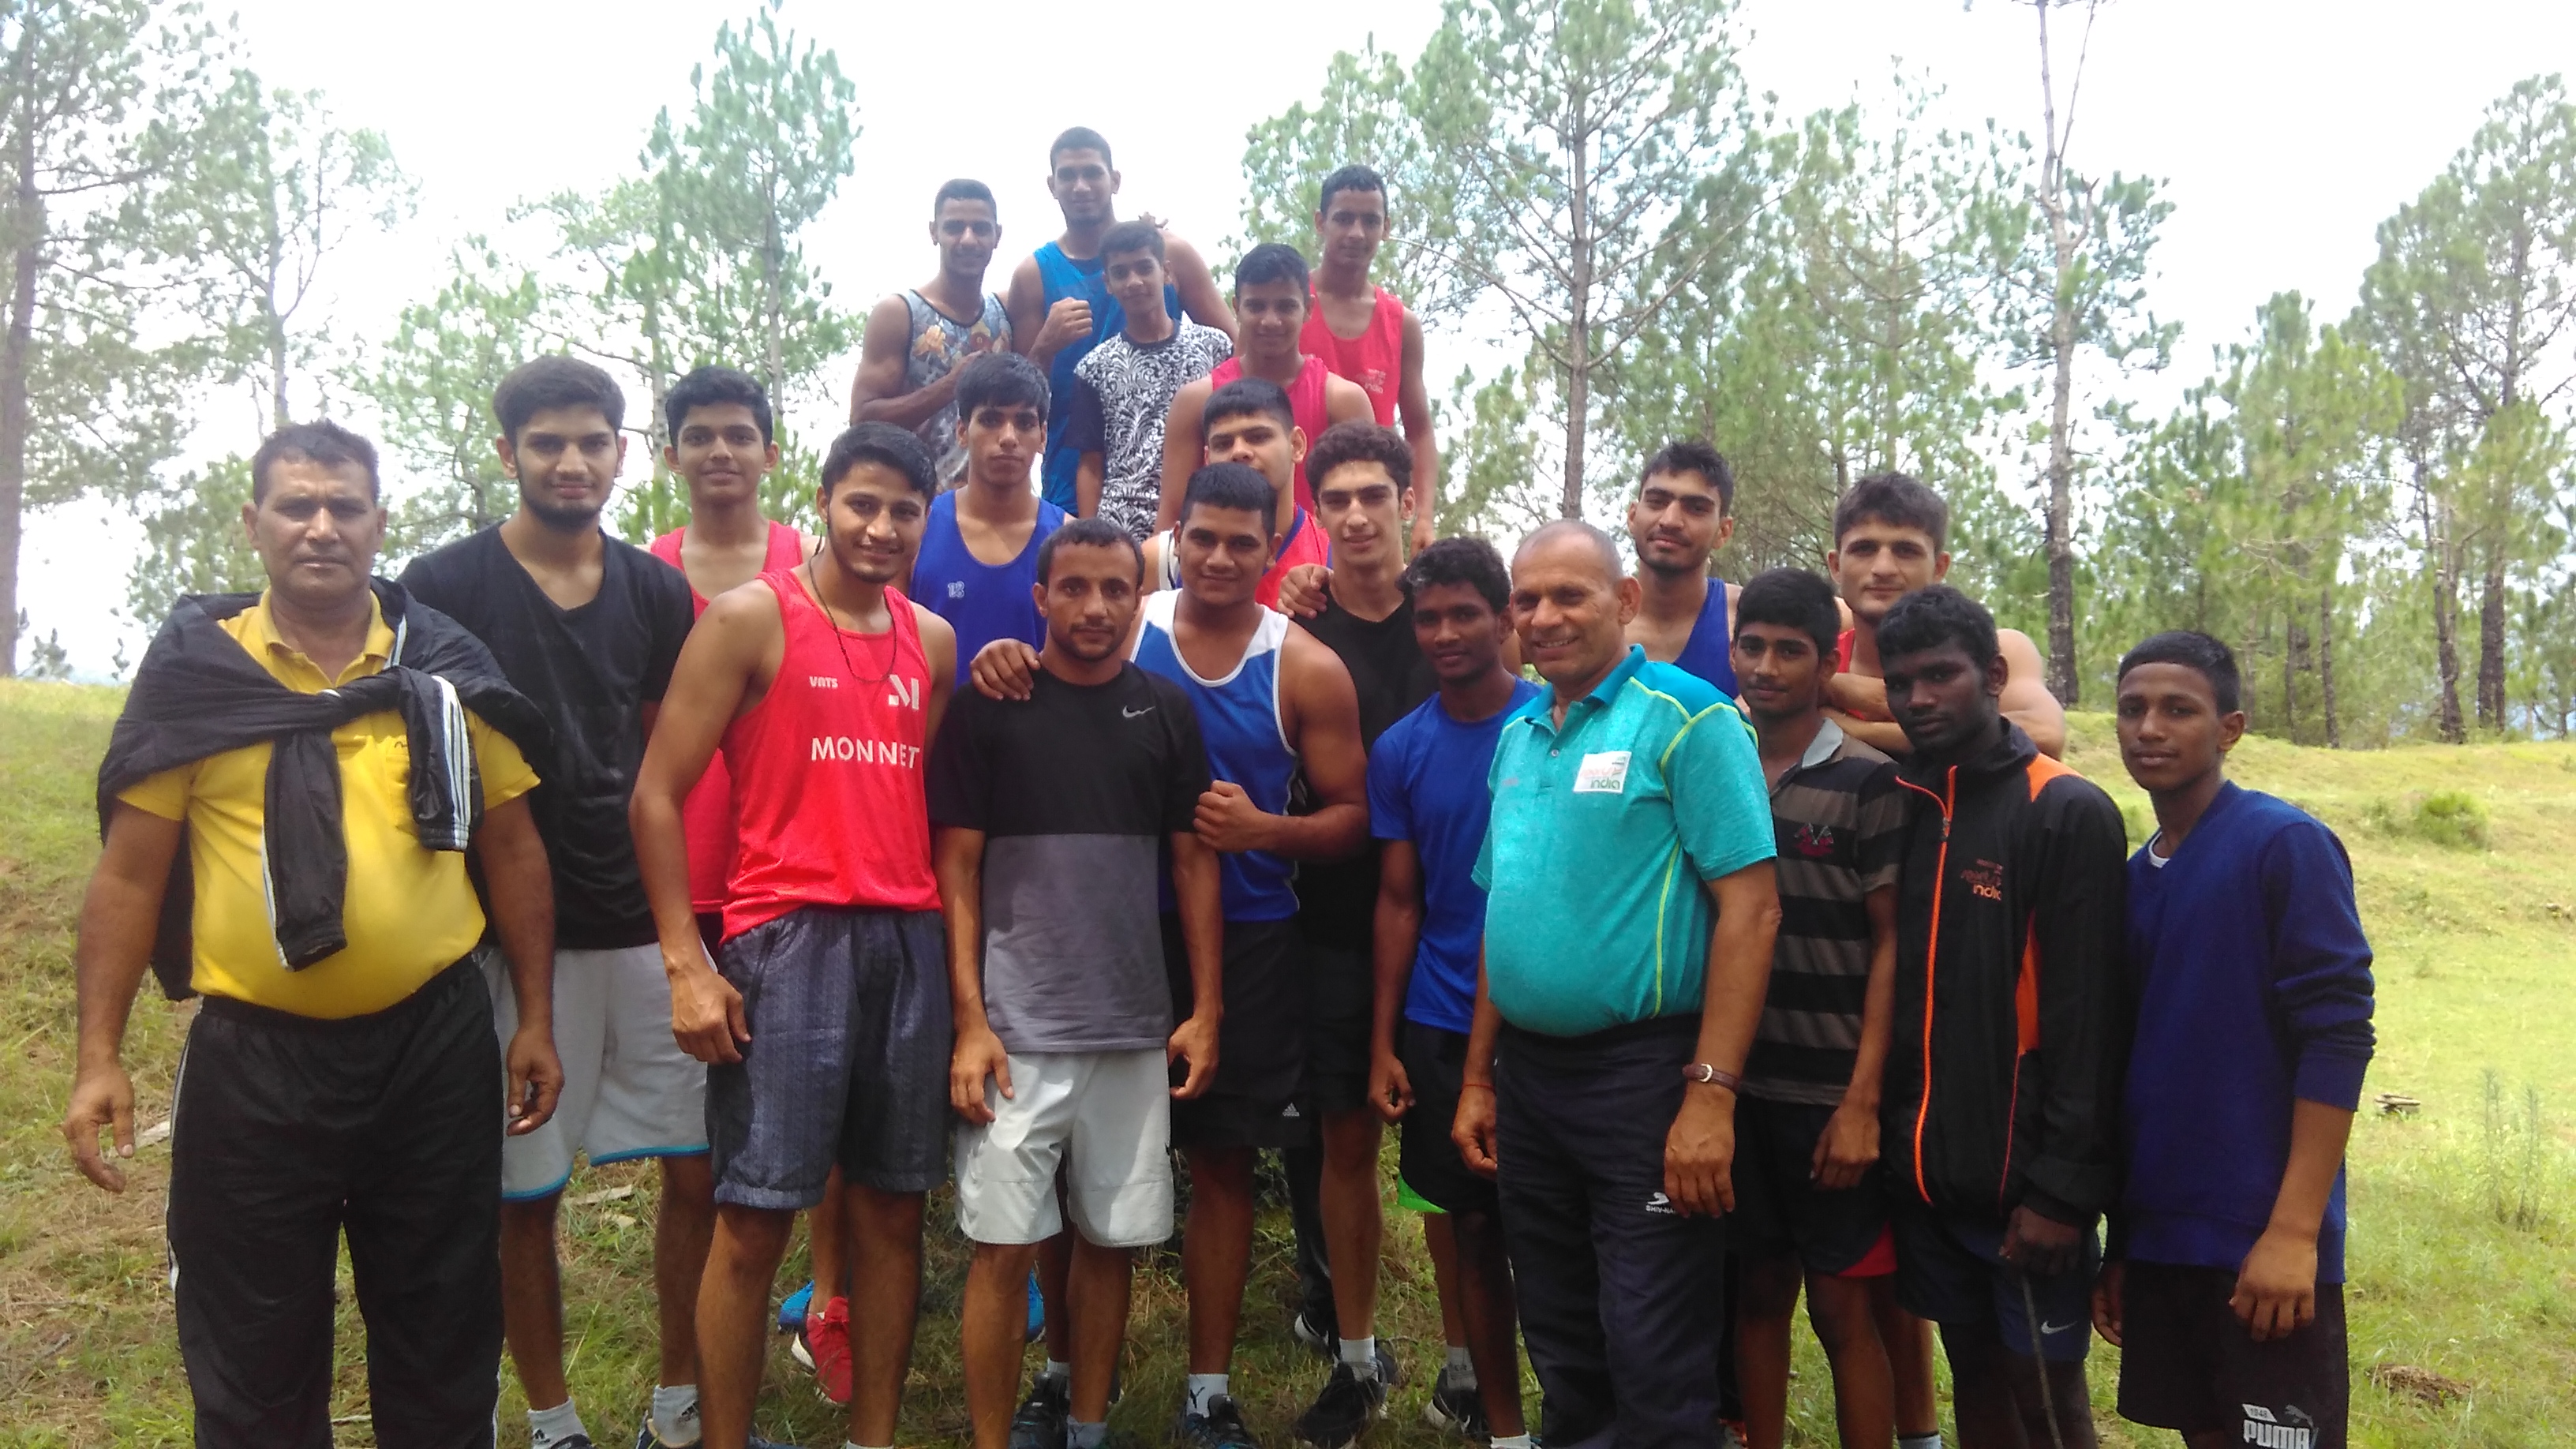 Sports Authority of India National Boxing Academy Rohtak's Trainees During Trakking in Mountains of Chail